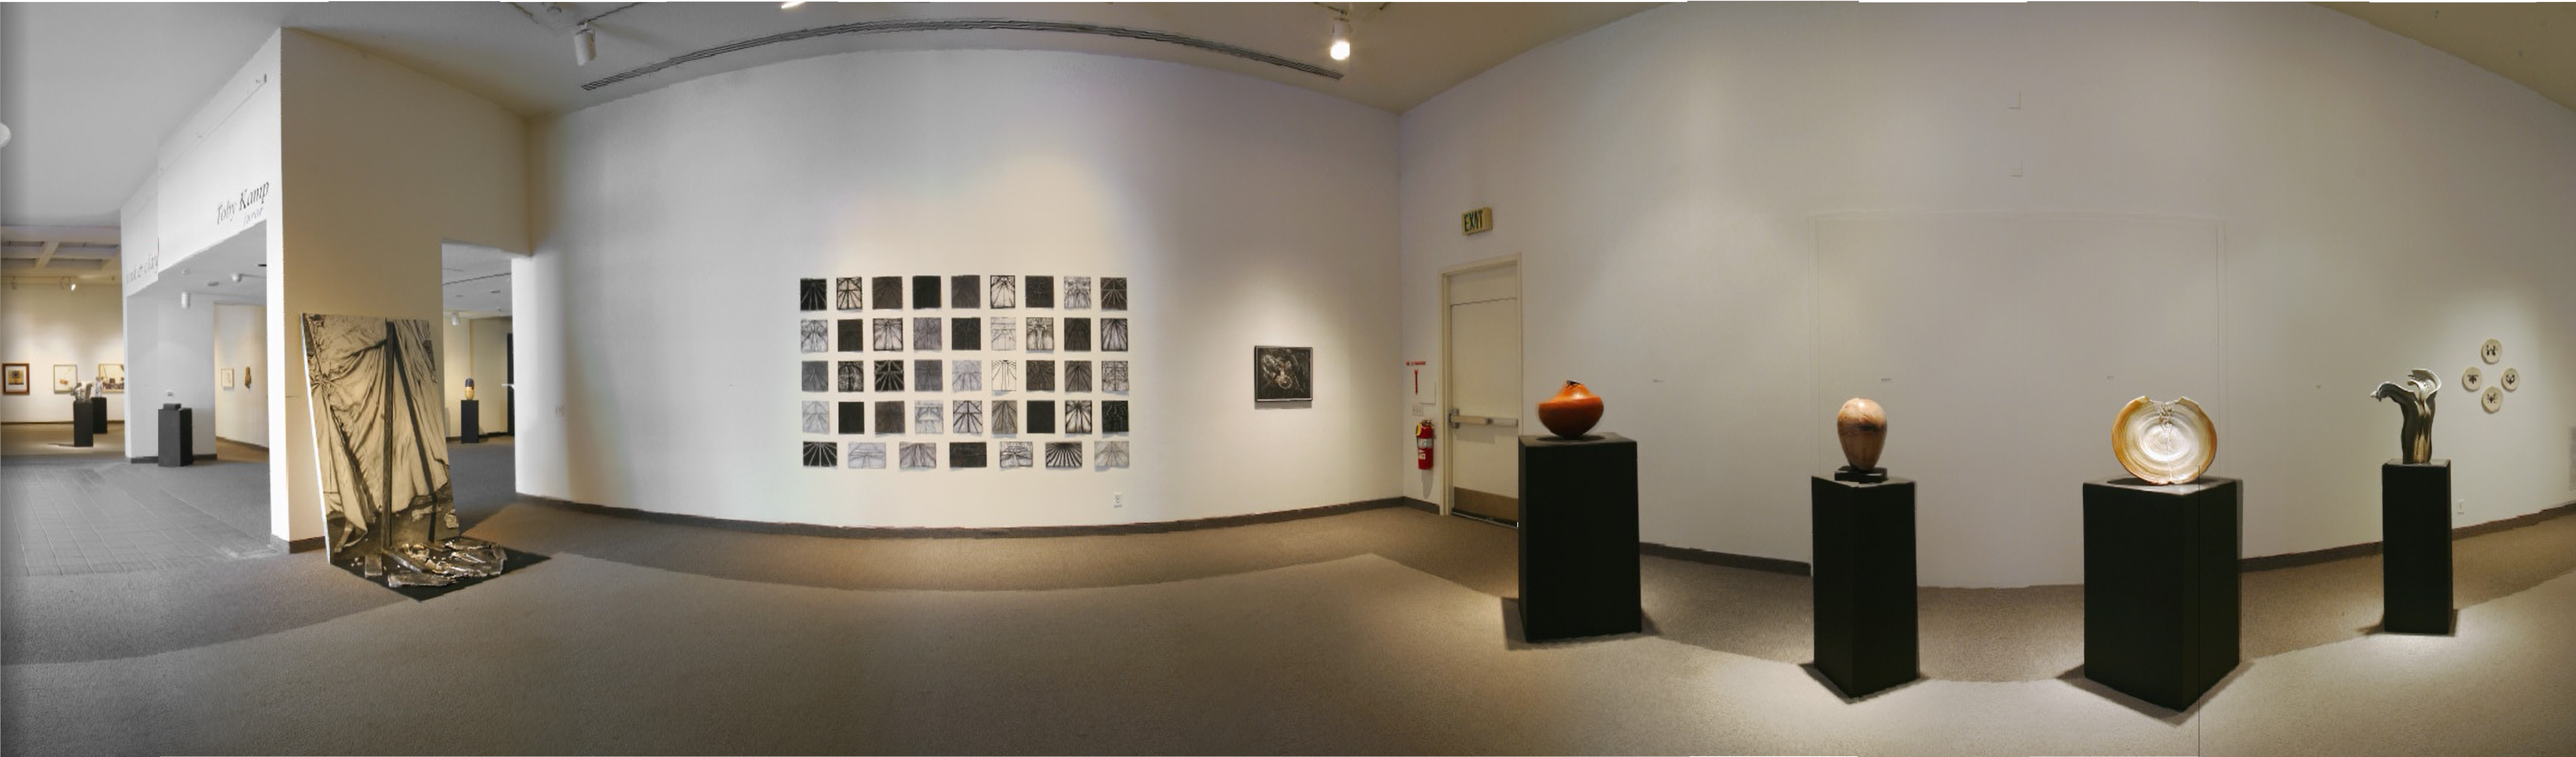 Installation View, Front West Gallery, Ink & Clay 29 Exhibition, January 06, 2003 to February 14, 2003